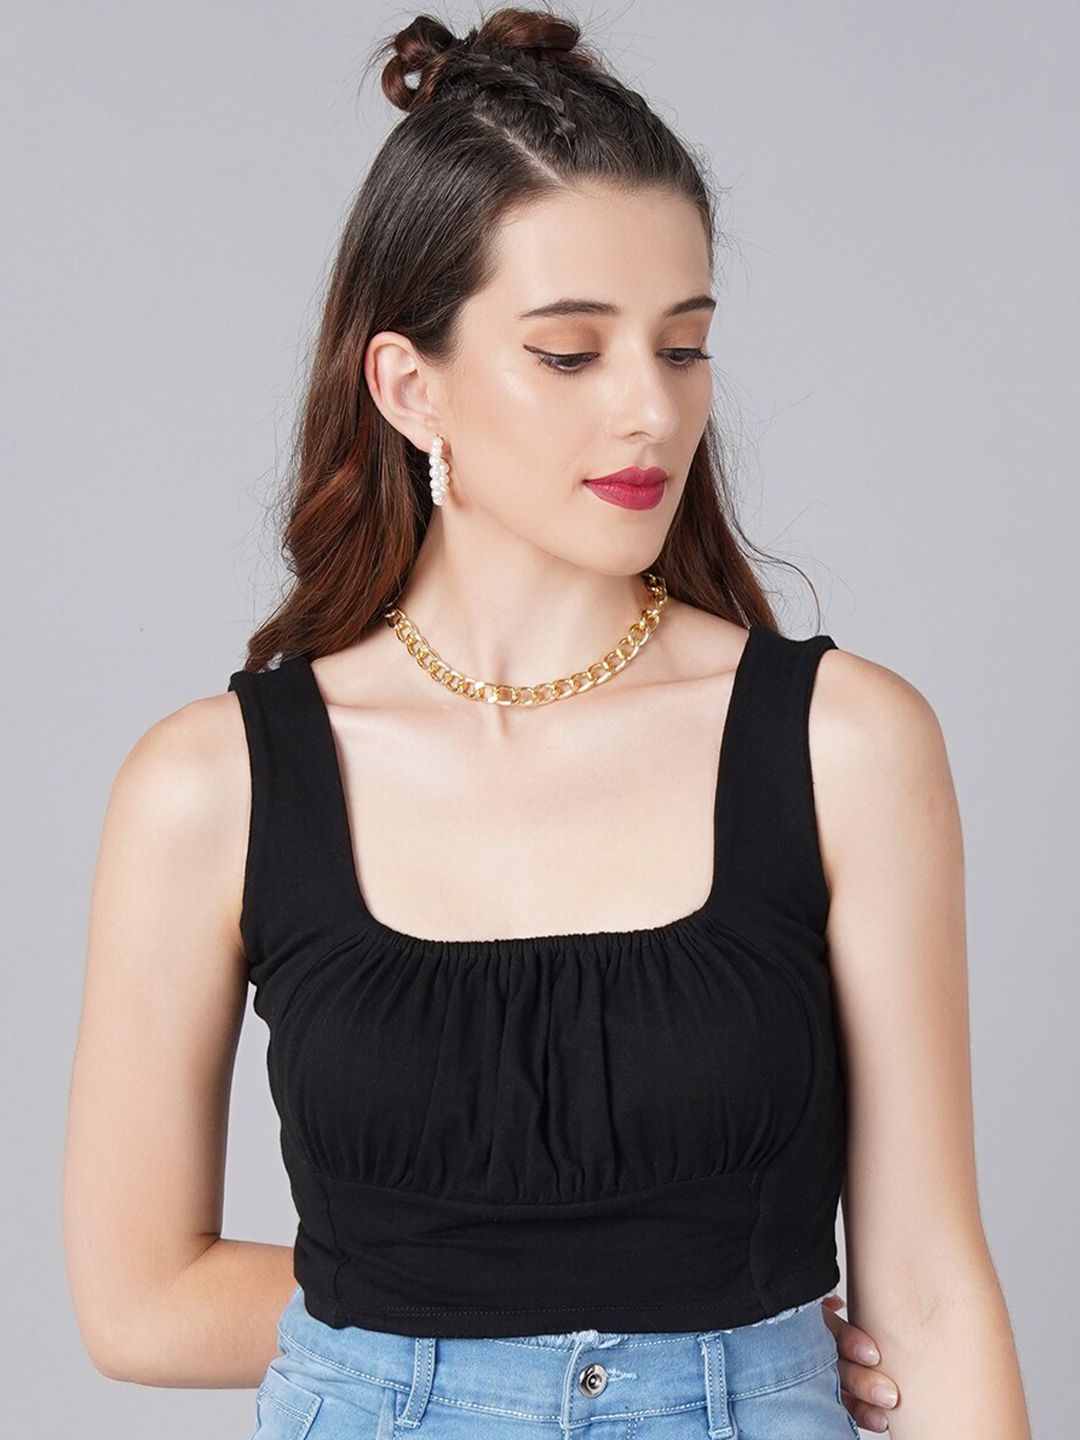 Cation Black Cotton Fitted Crop Top Price in India